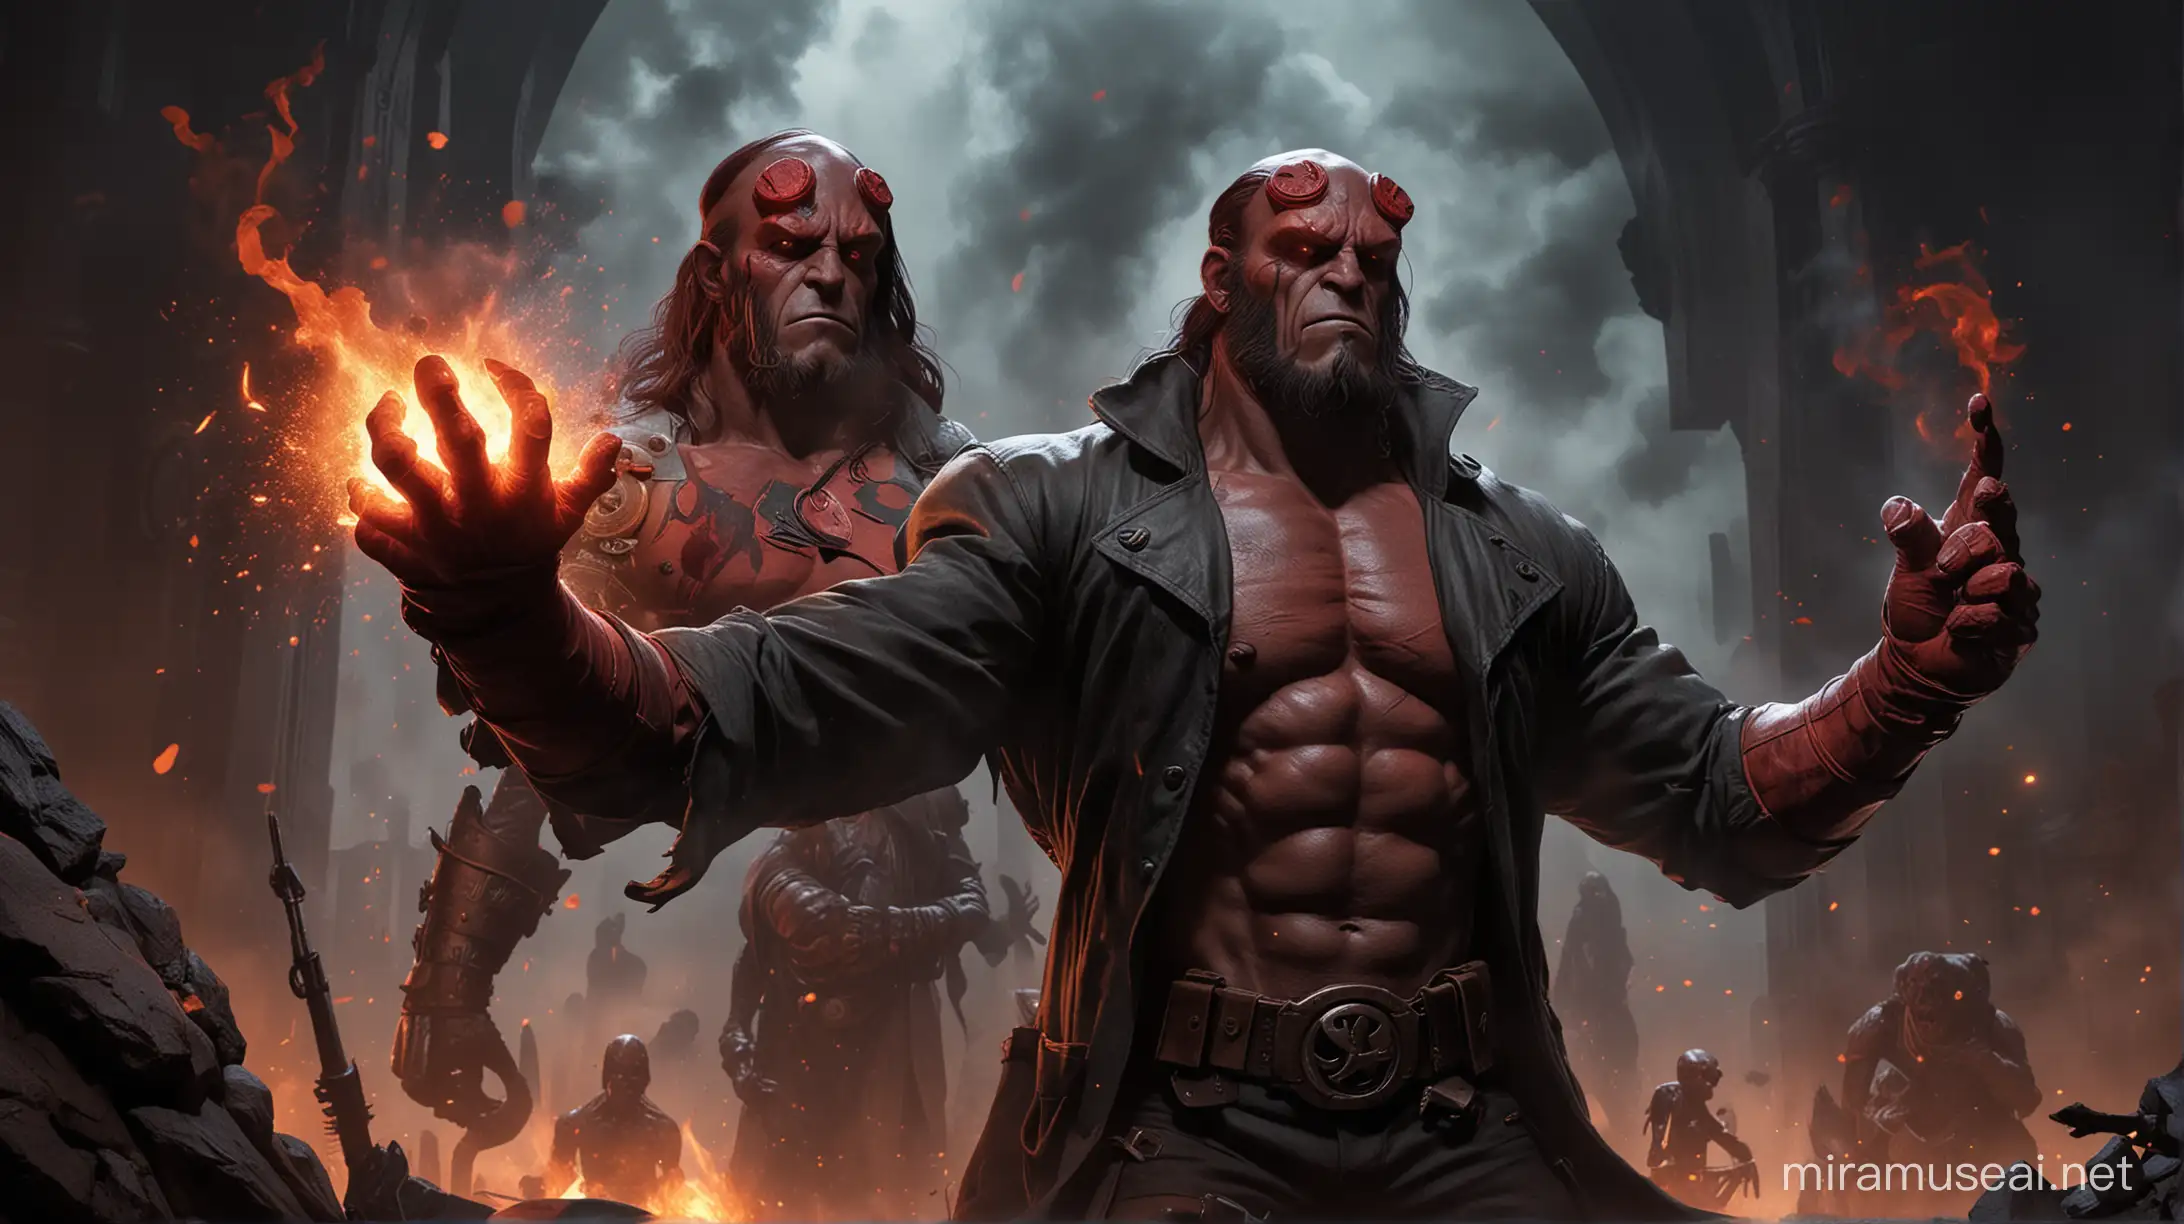 Feature a prominent image of Hellboy in a dynamic pose, showcasing his iconic red-skinned appearance, muscular physique, and his signature Right Hand of Doom. Position him towards the center of the thumbnail to draw attention.  Use a background with fiery and smoky elements , Incorporate shades of red, orange, and black to evoke the fiery atmosphere associated with Hellboy's world.  Include smaller images or silhouettes of other key characters from the movie, such as Liz Sherman or Abe Sapien, Position them strategically around Hellboy  Enhance the thumbnail with sparks, smoke, or glowing symbols associated with Hellboy's supernatural world.